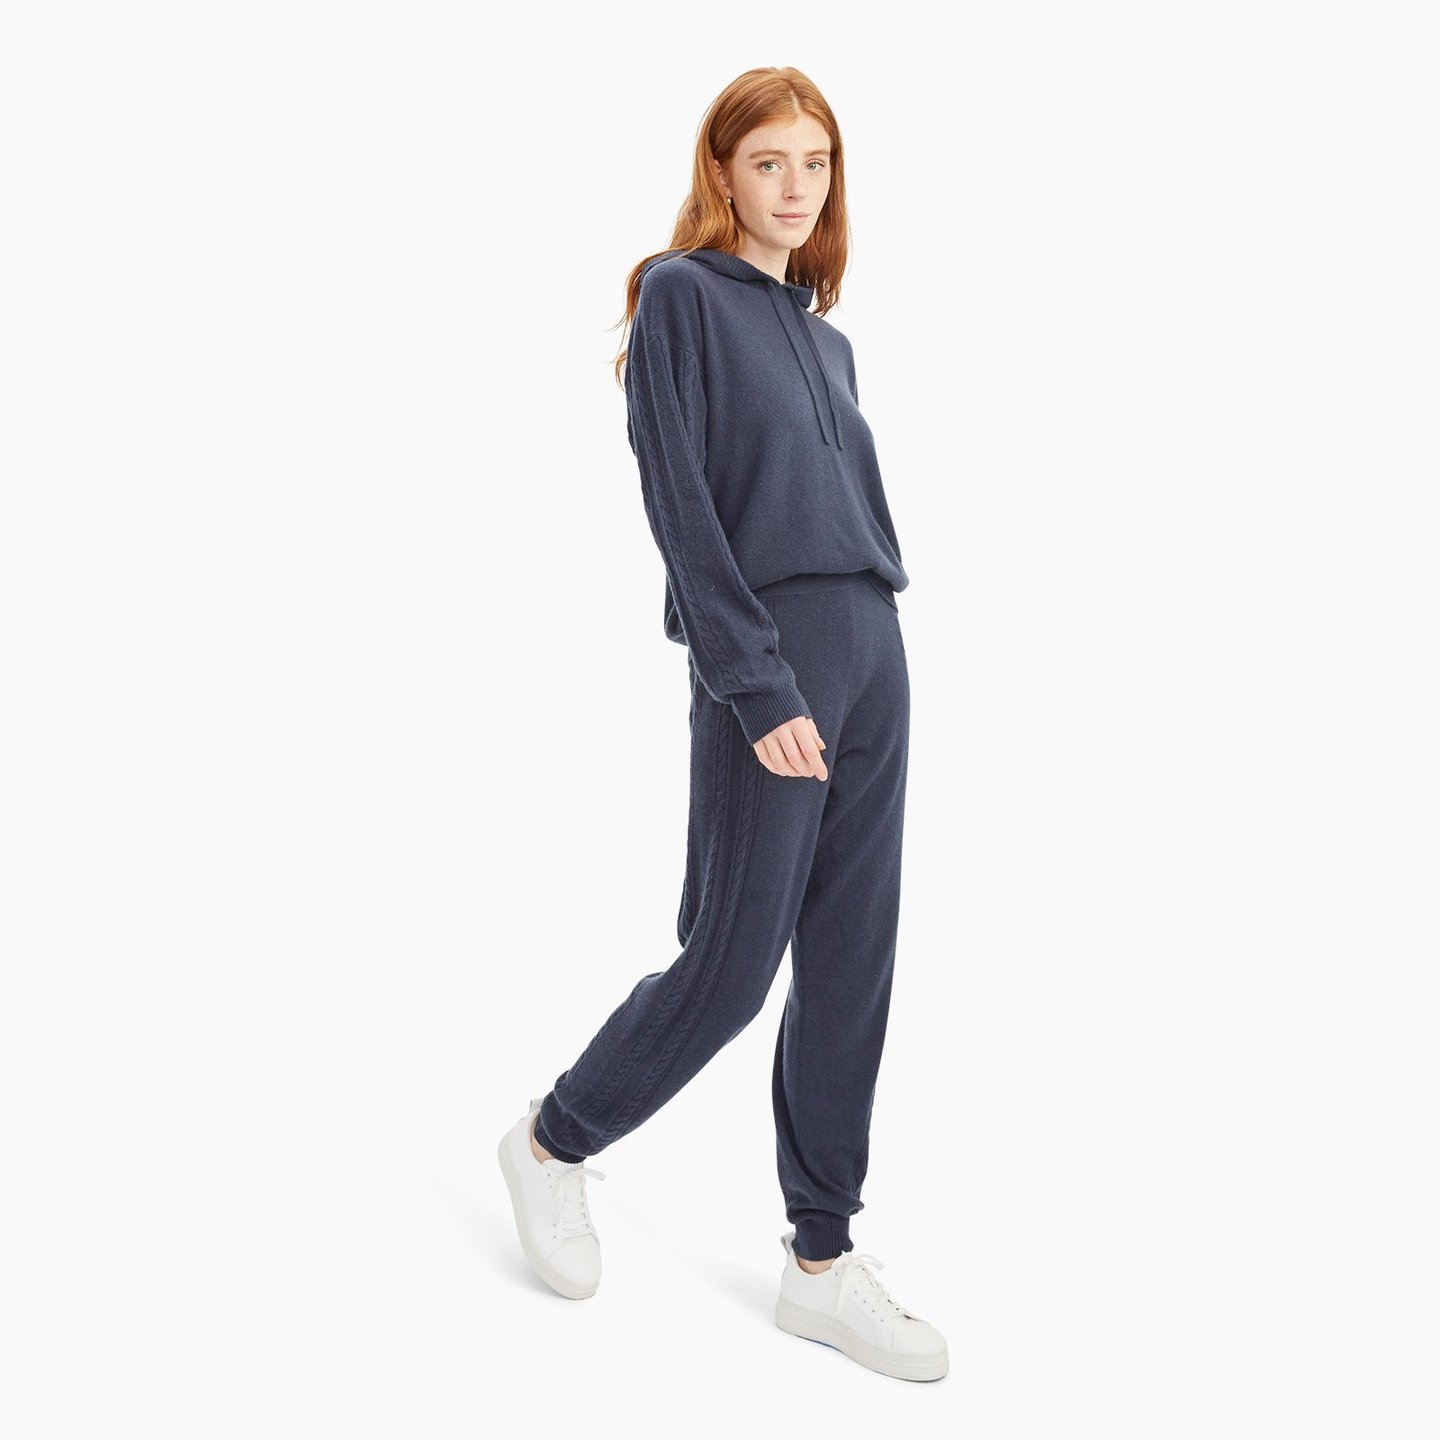 NWEB000842_Cashmere_Cable_Jogger_Stone_Blue_009_1440x.jpg